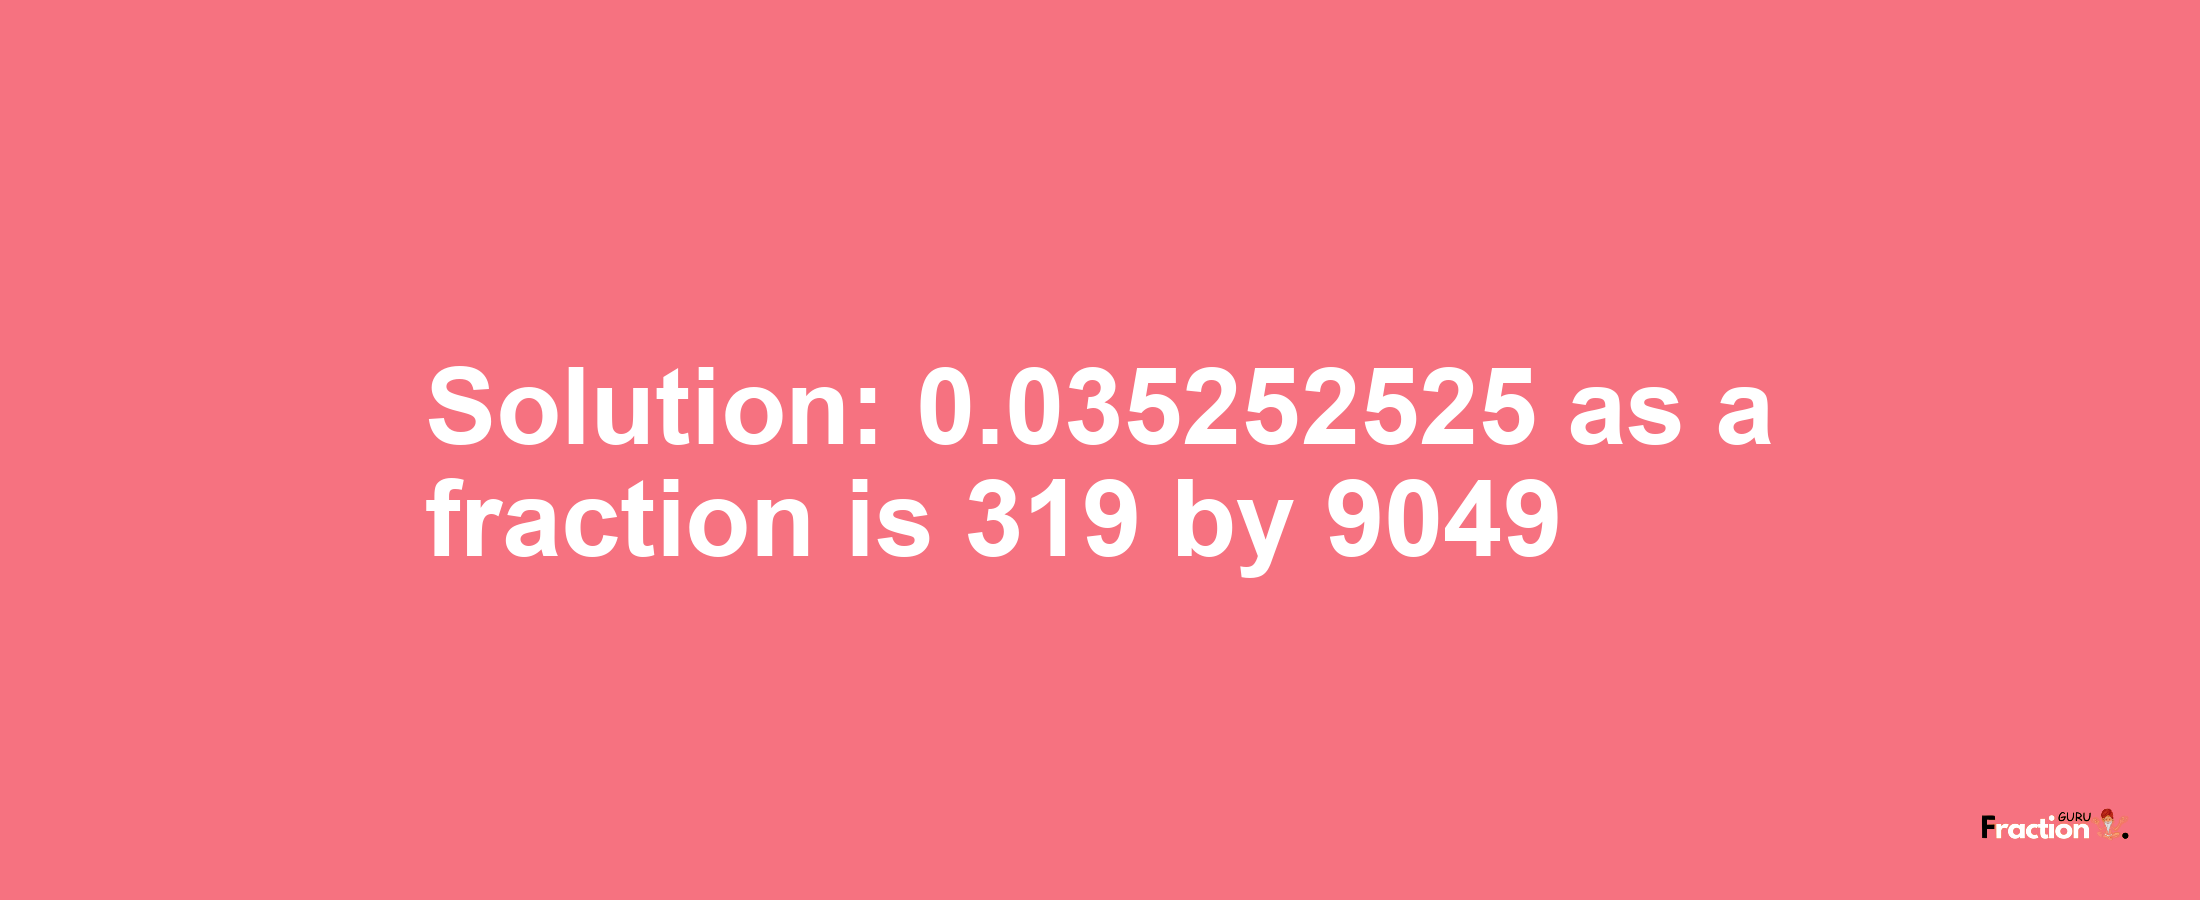 Solution:0.035252525 as a fraction is 319/9049